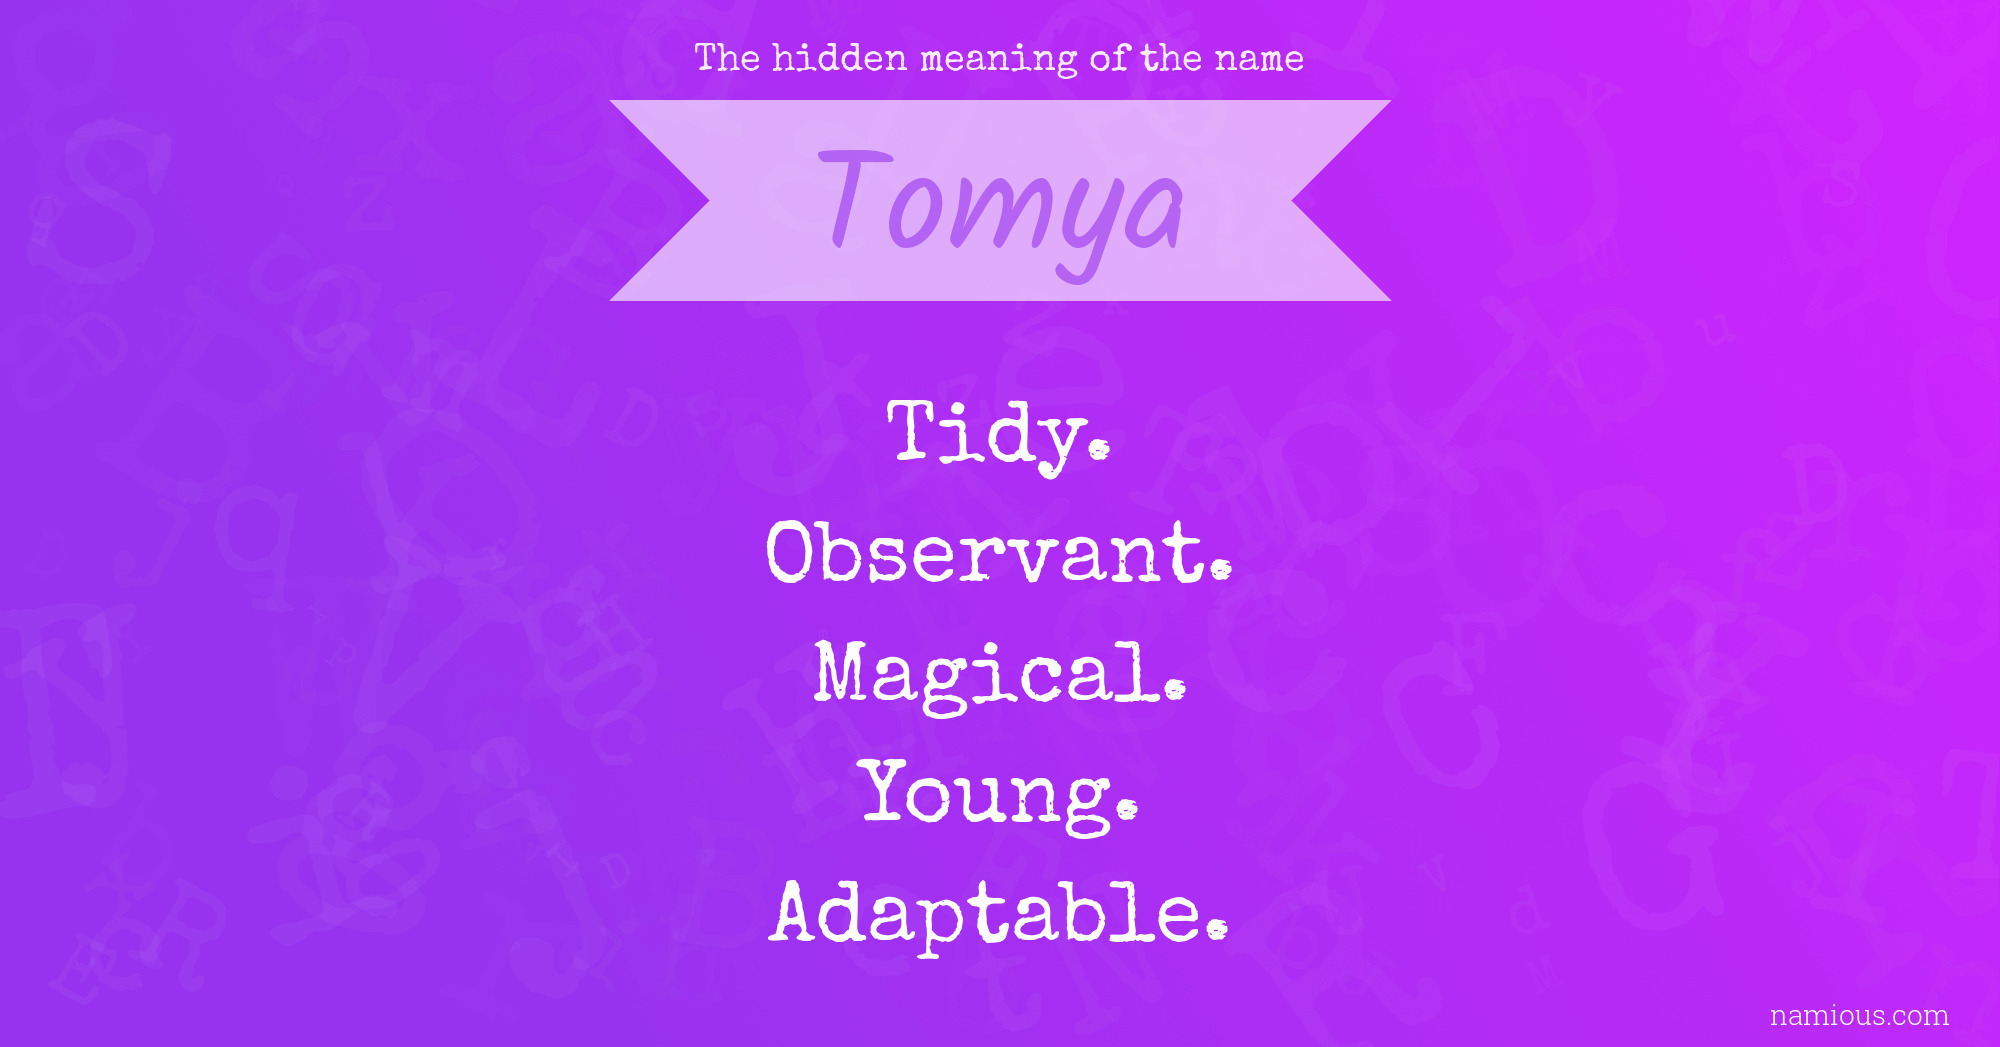 The hidden meaning of the name Tomya